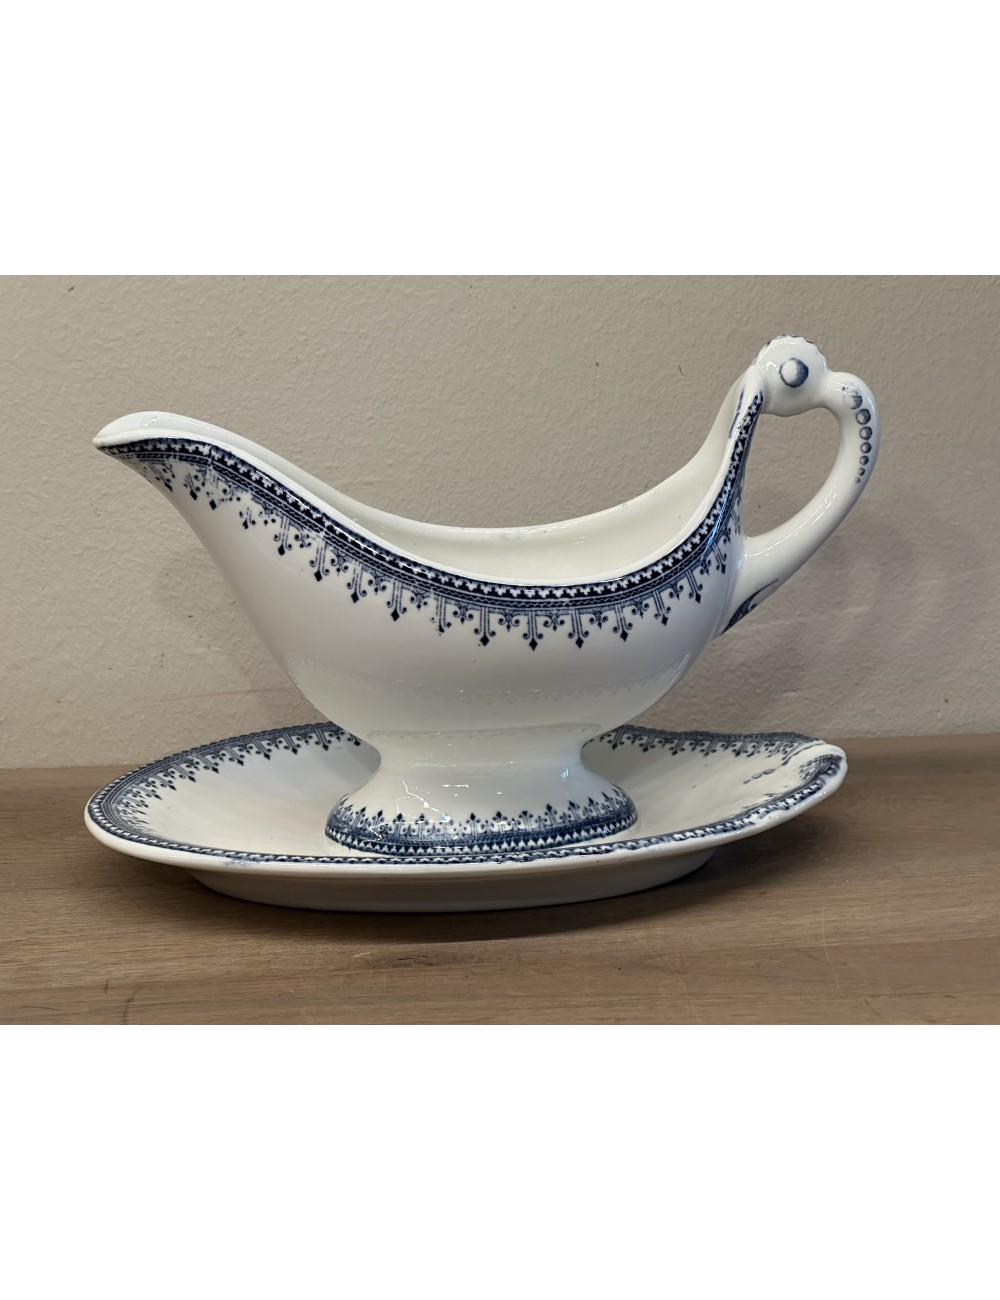 Gravy boat / Sauce bowl - unmarked but Petrus Regout - décor BORDURE in blue with tooling